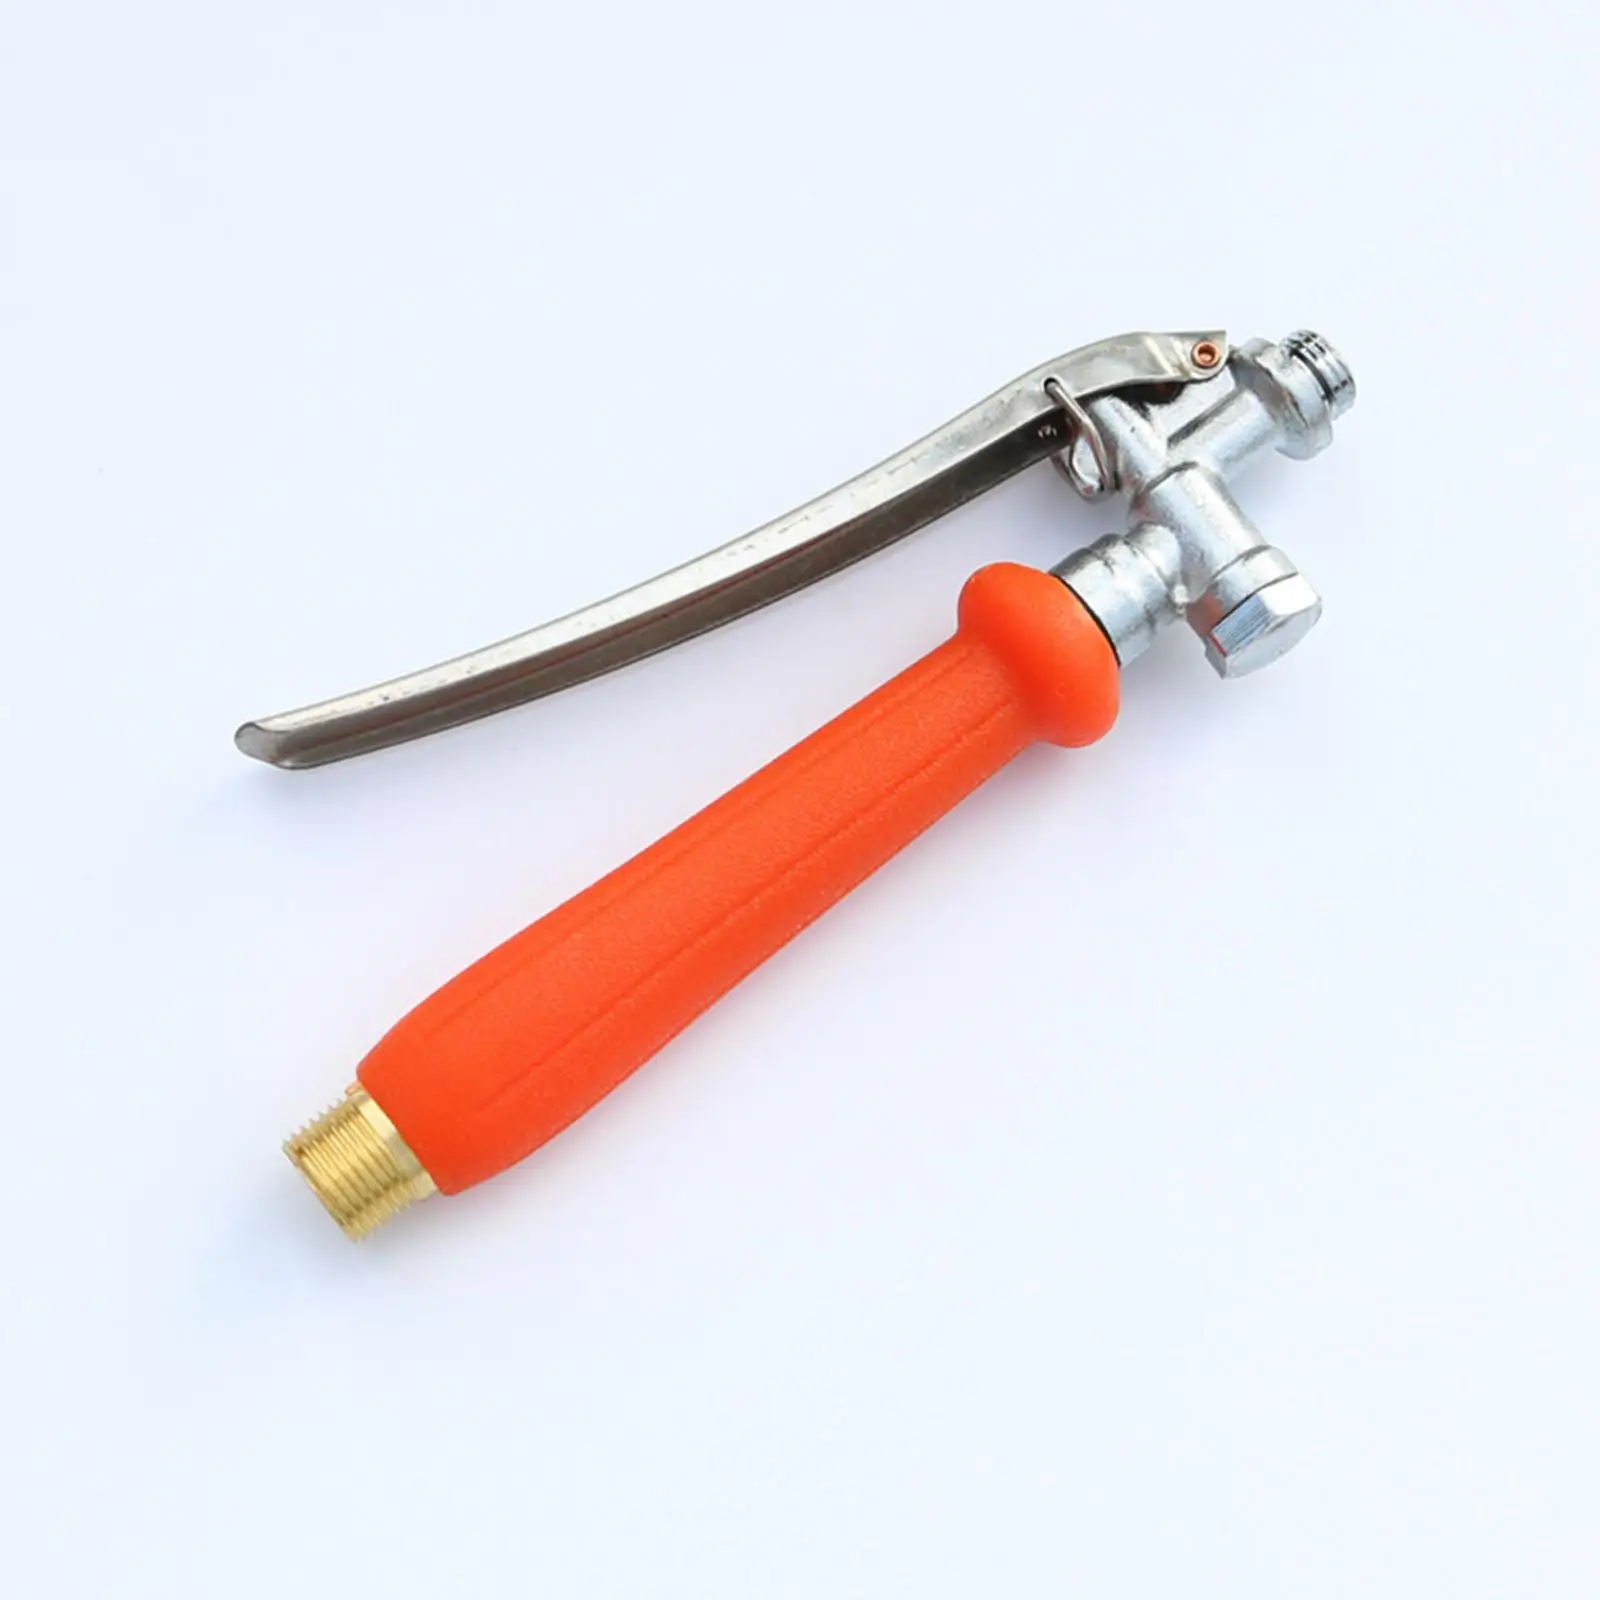 Trigger Sprayer Handle Portable Multifunctional Fittings Accessory Part for